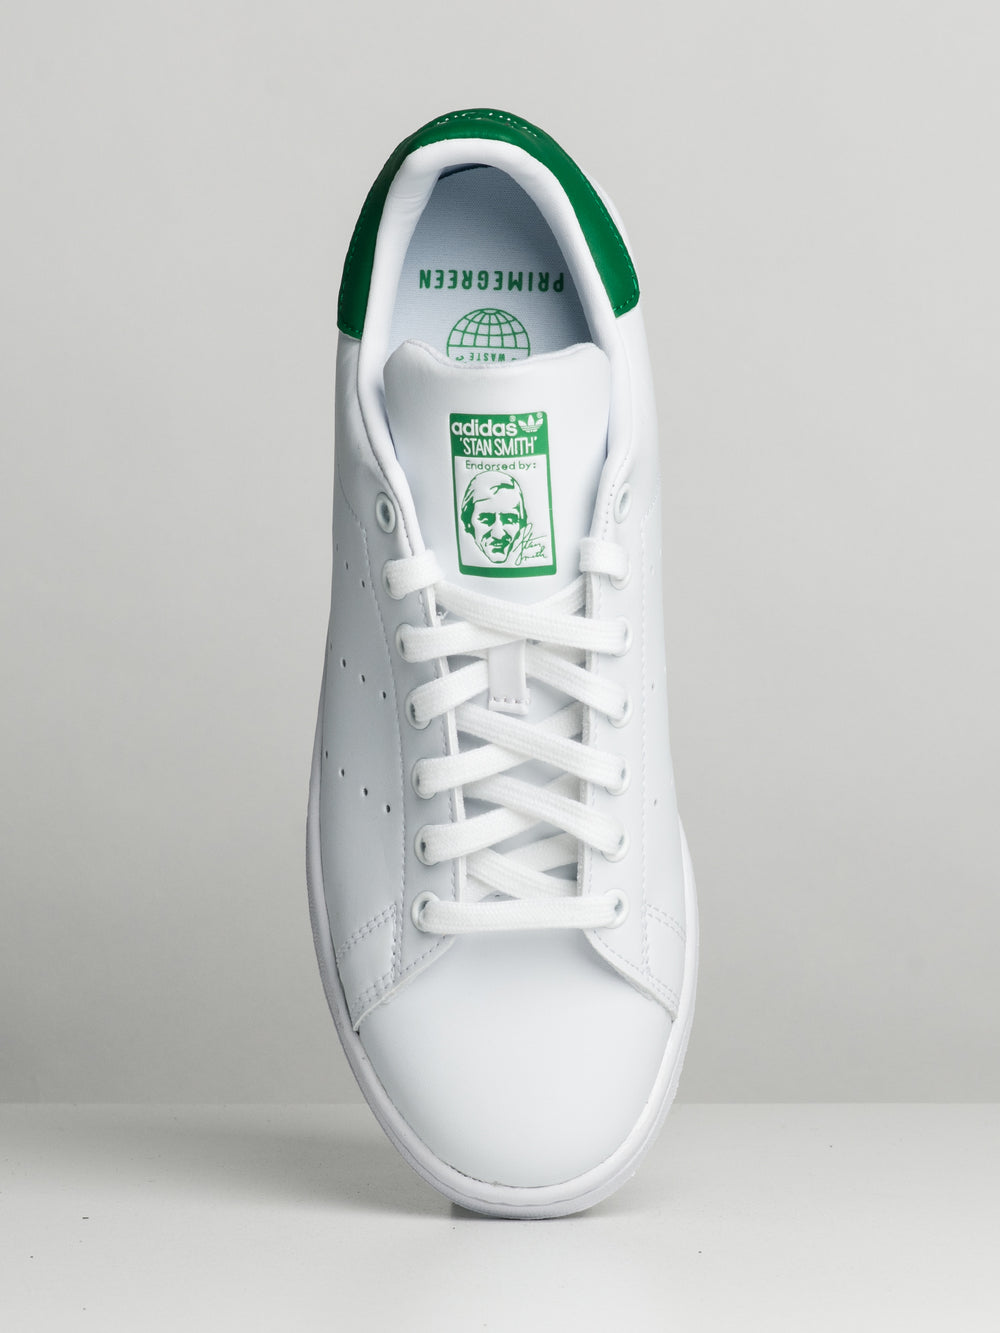 MENS ADIDAS STAN SMITH SNEAKERS - CLEARANCE